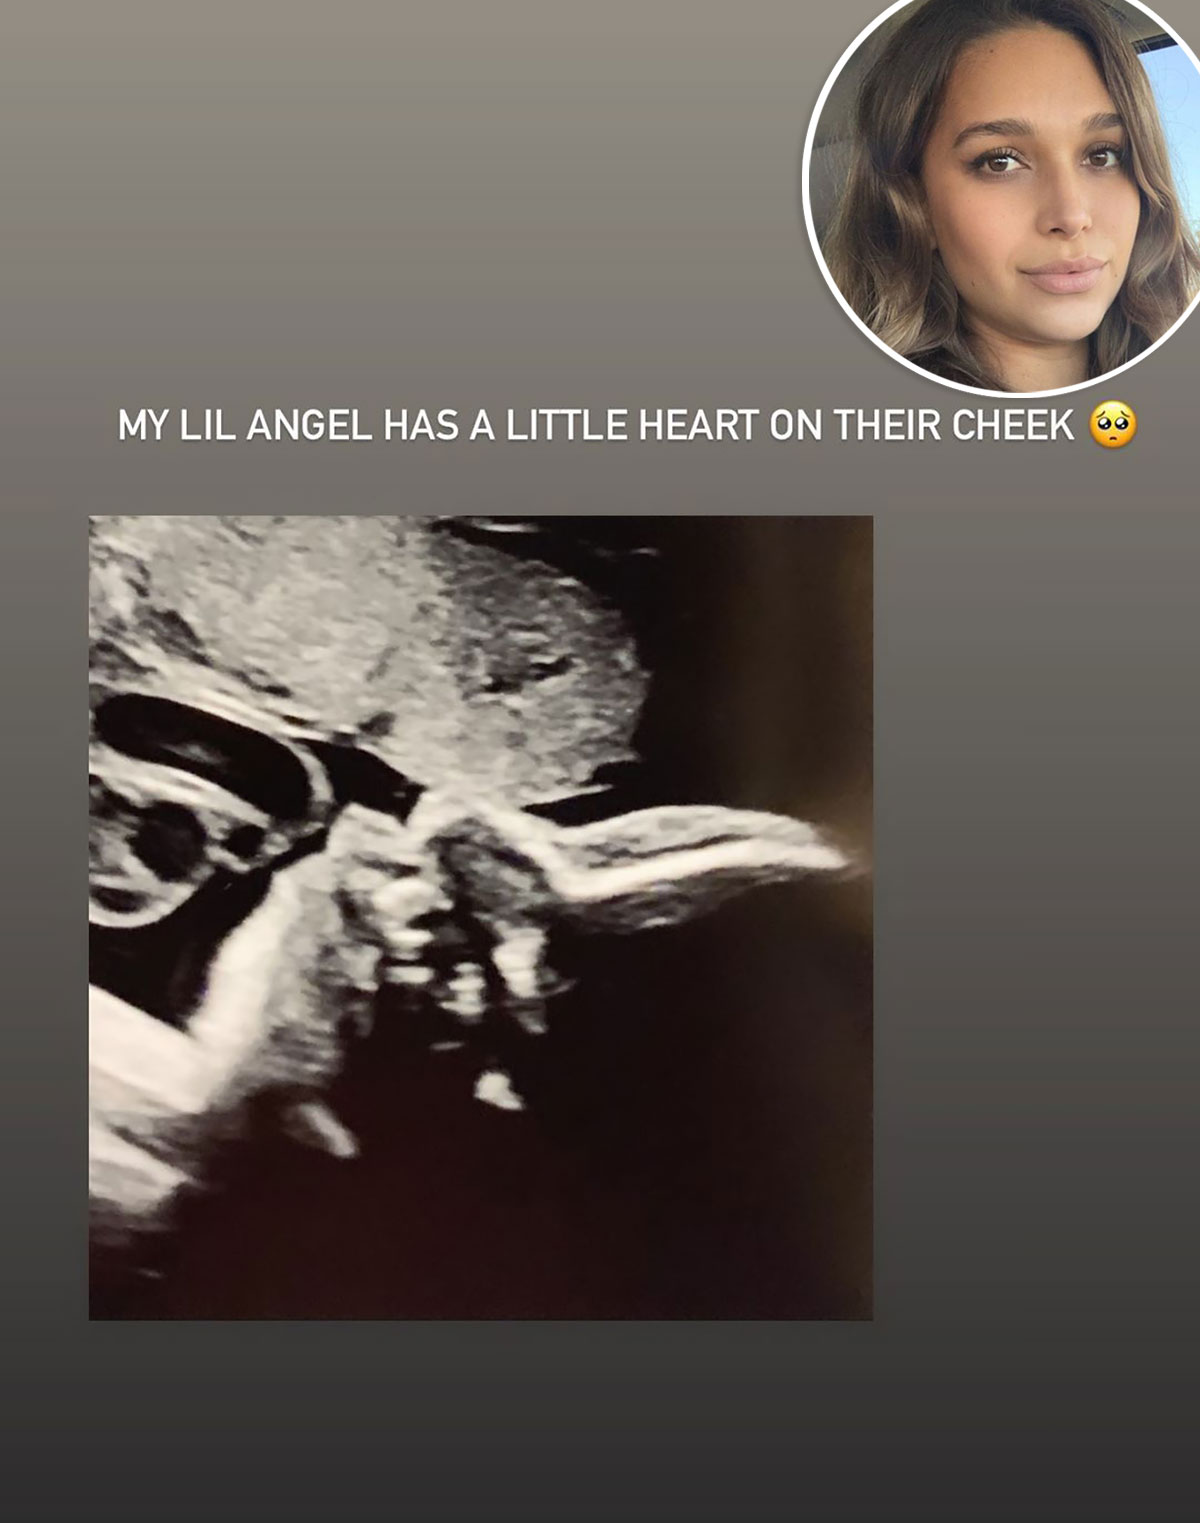 Giving Glimpses! April Love Geary and More Stars Show Ultrasound Pics